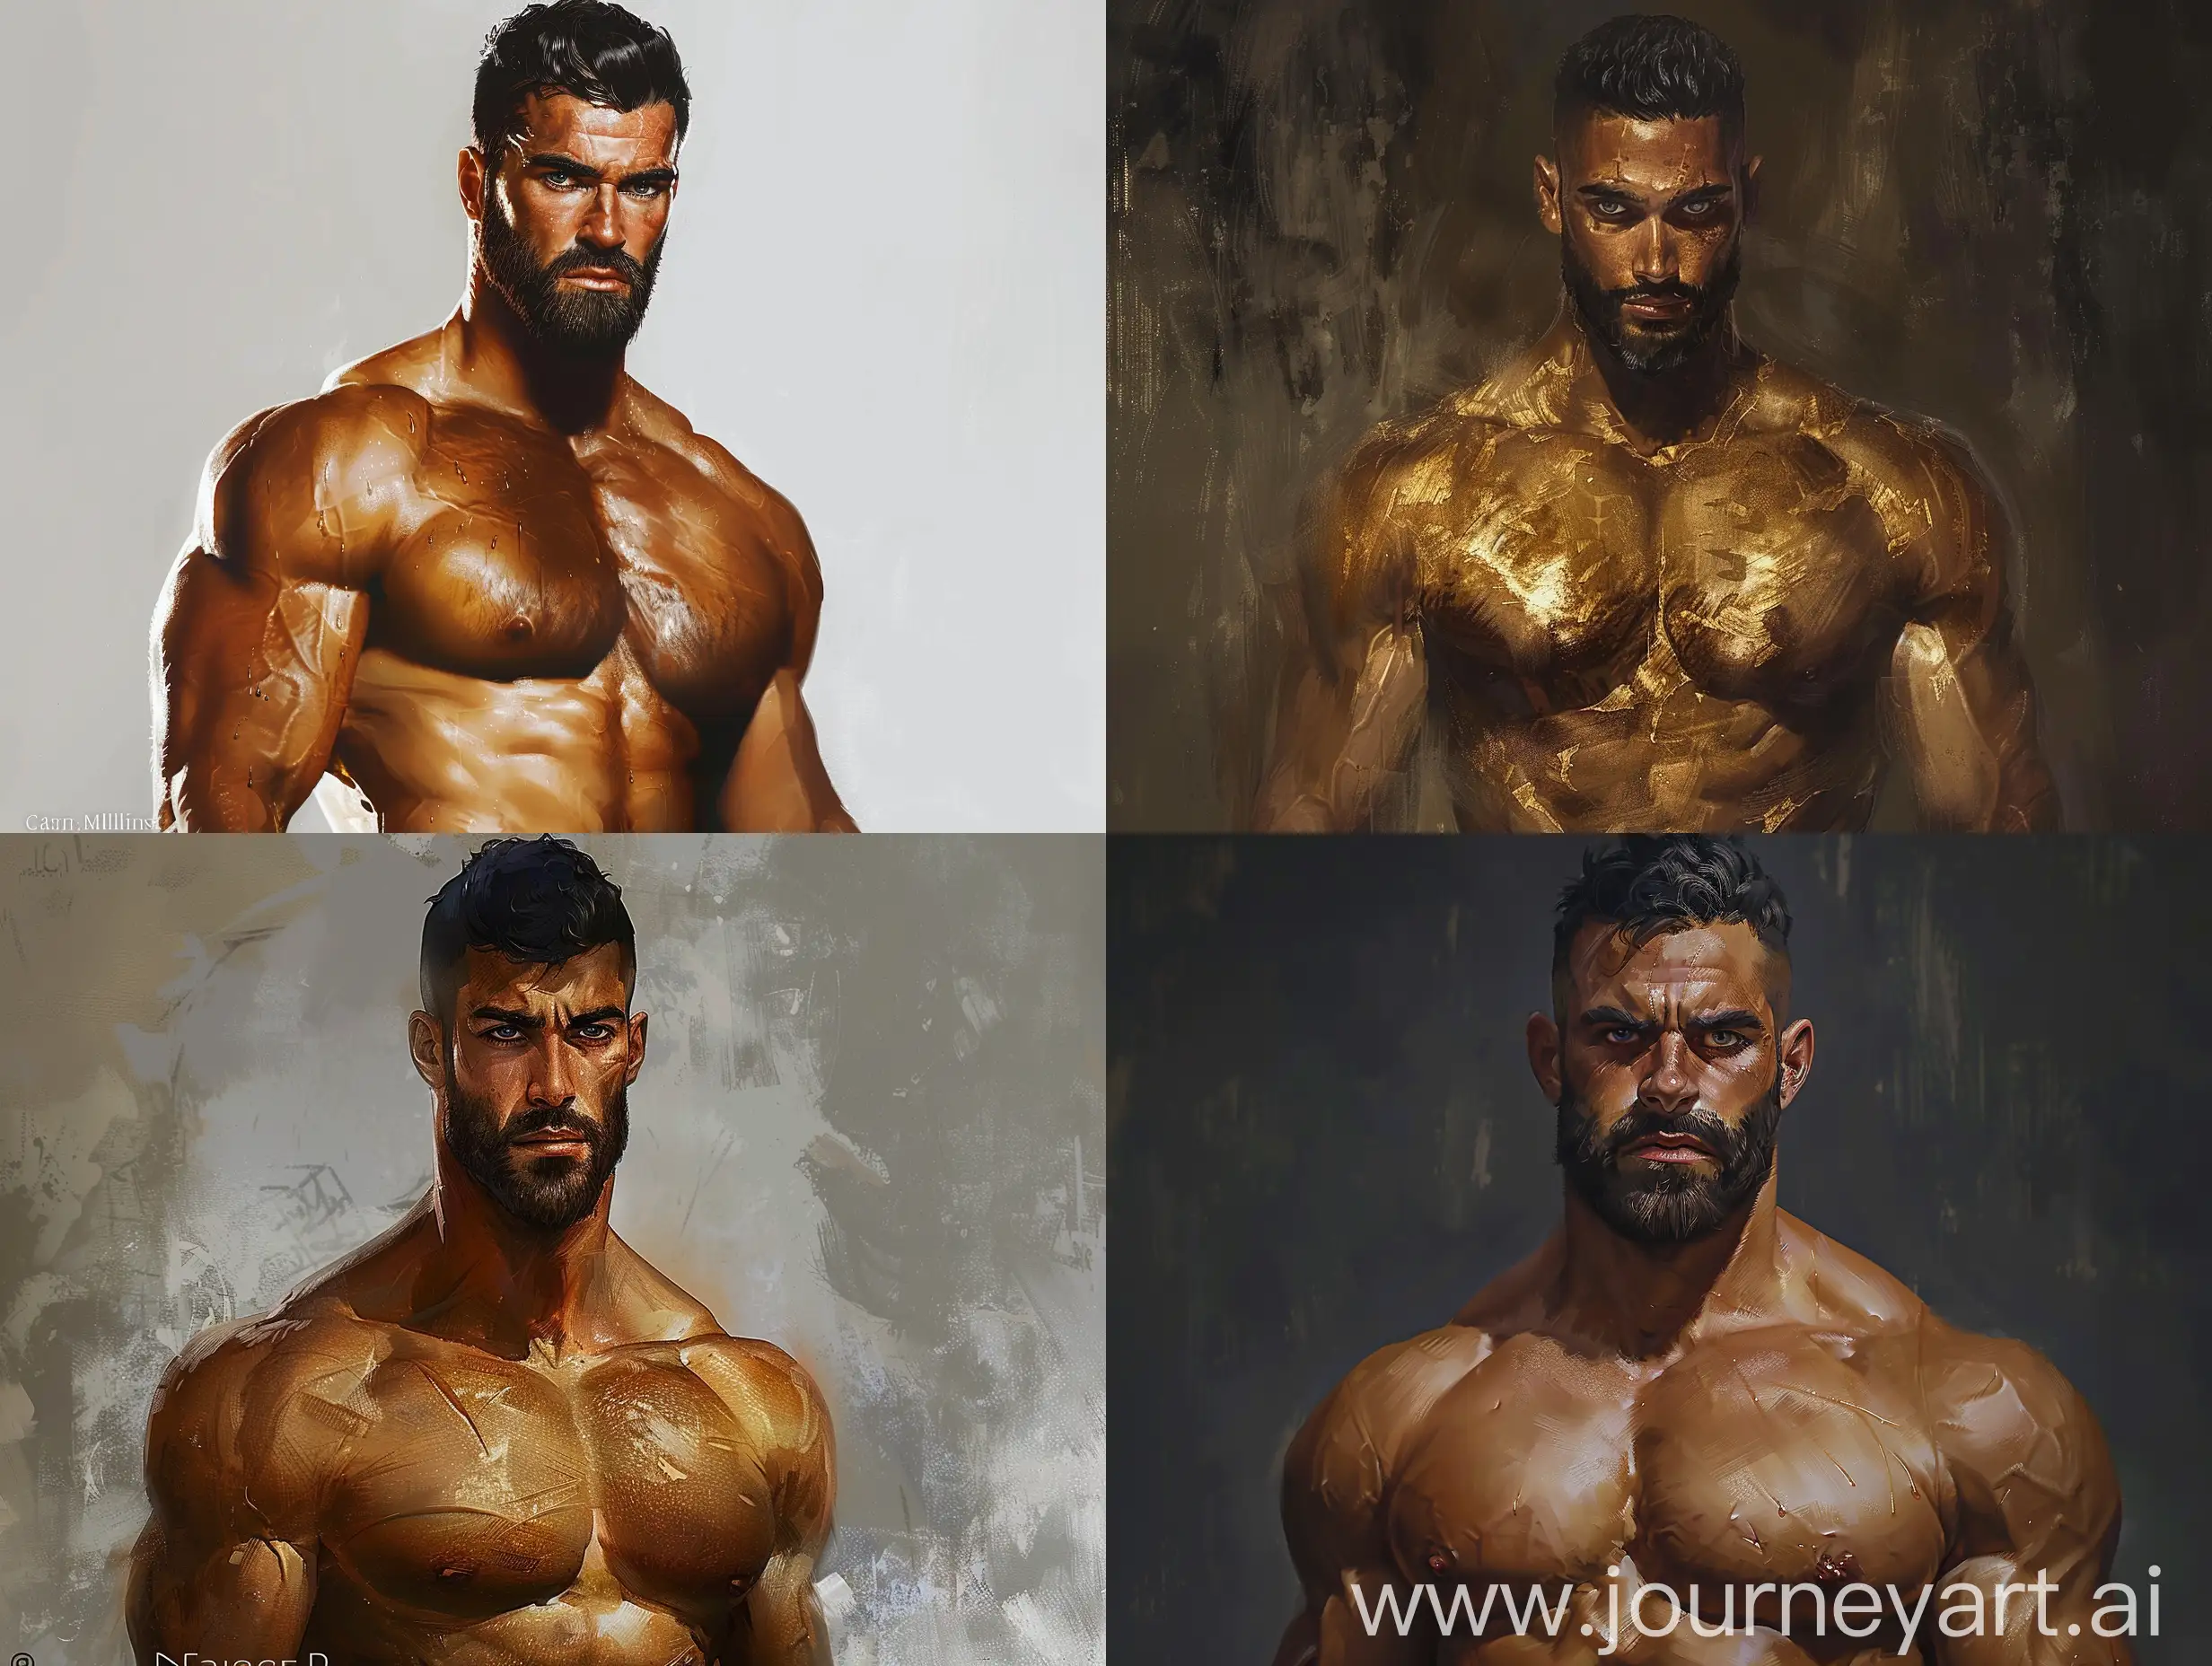 detailed, intricate, stunning, extremely realistic painted realism, detailed digital painting concept art, detailed paiting by gaston bussiere, craig mullins A mystical, dreamlike portrait in a cinematic style, evoking. A supernatural god as a man. Full body view Golden bronze skin, glossy black hair, short beard, grey eyes, very muscular and toned, incredibly handsome. 